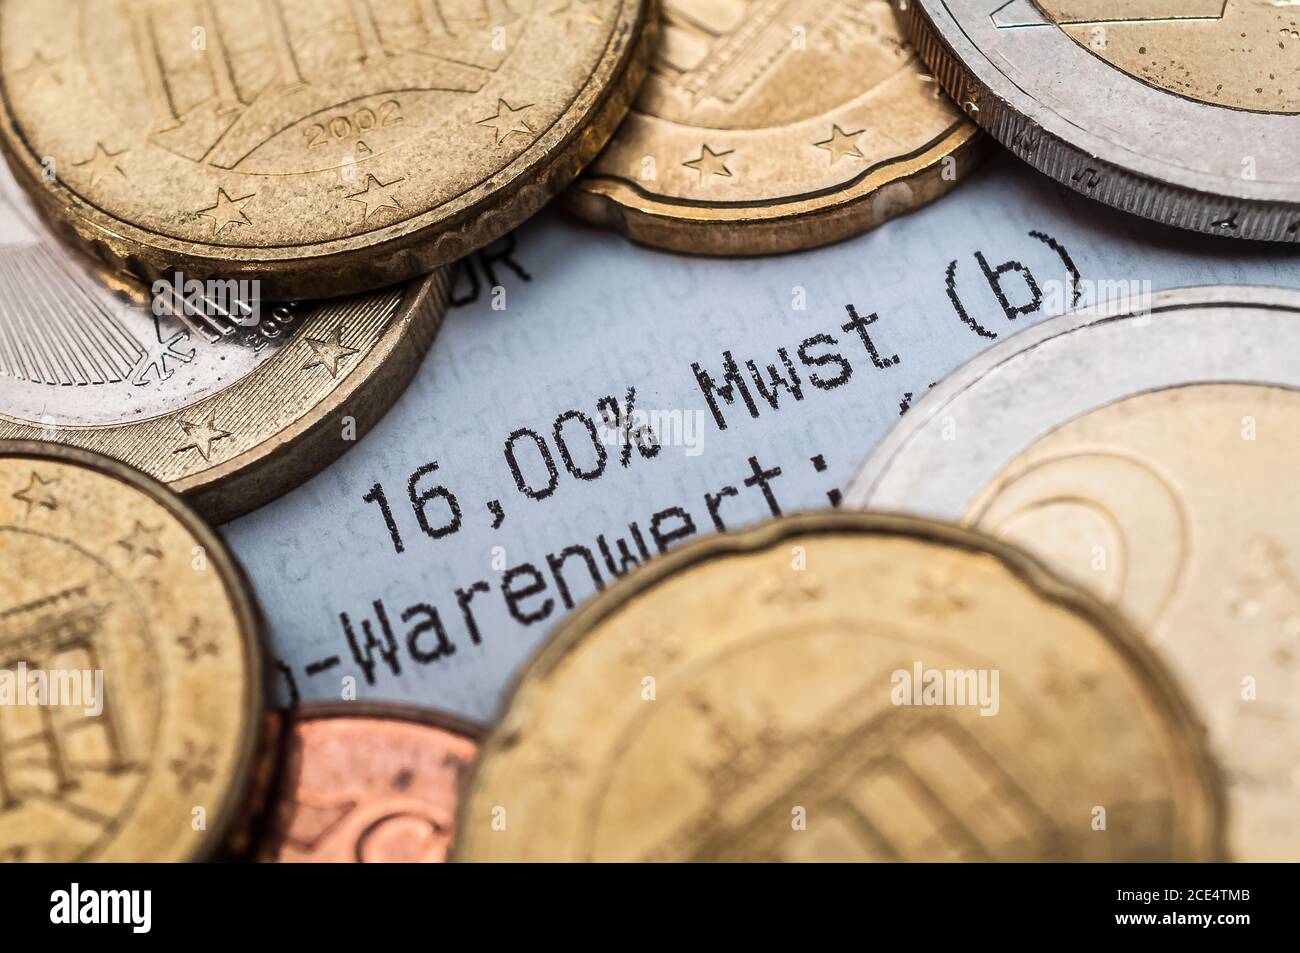 value-added tax 16% Germany Stock Photo